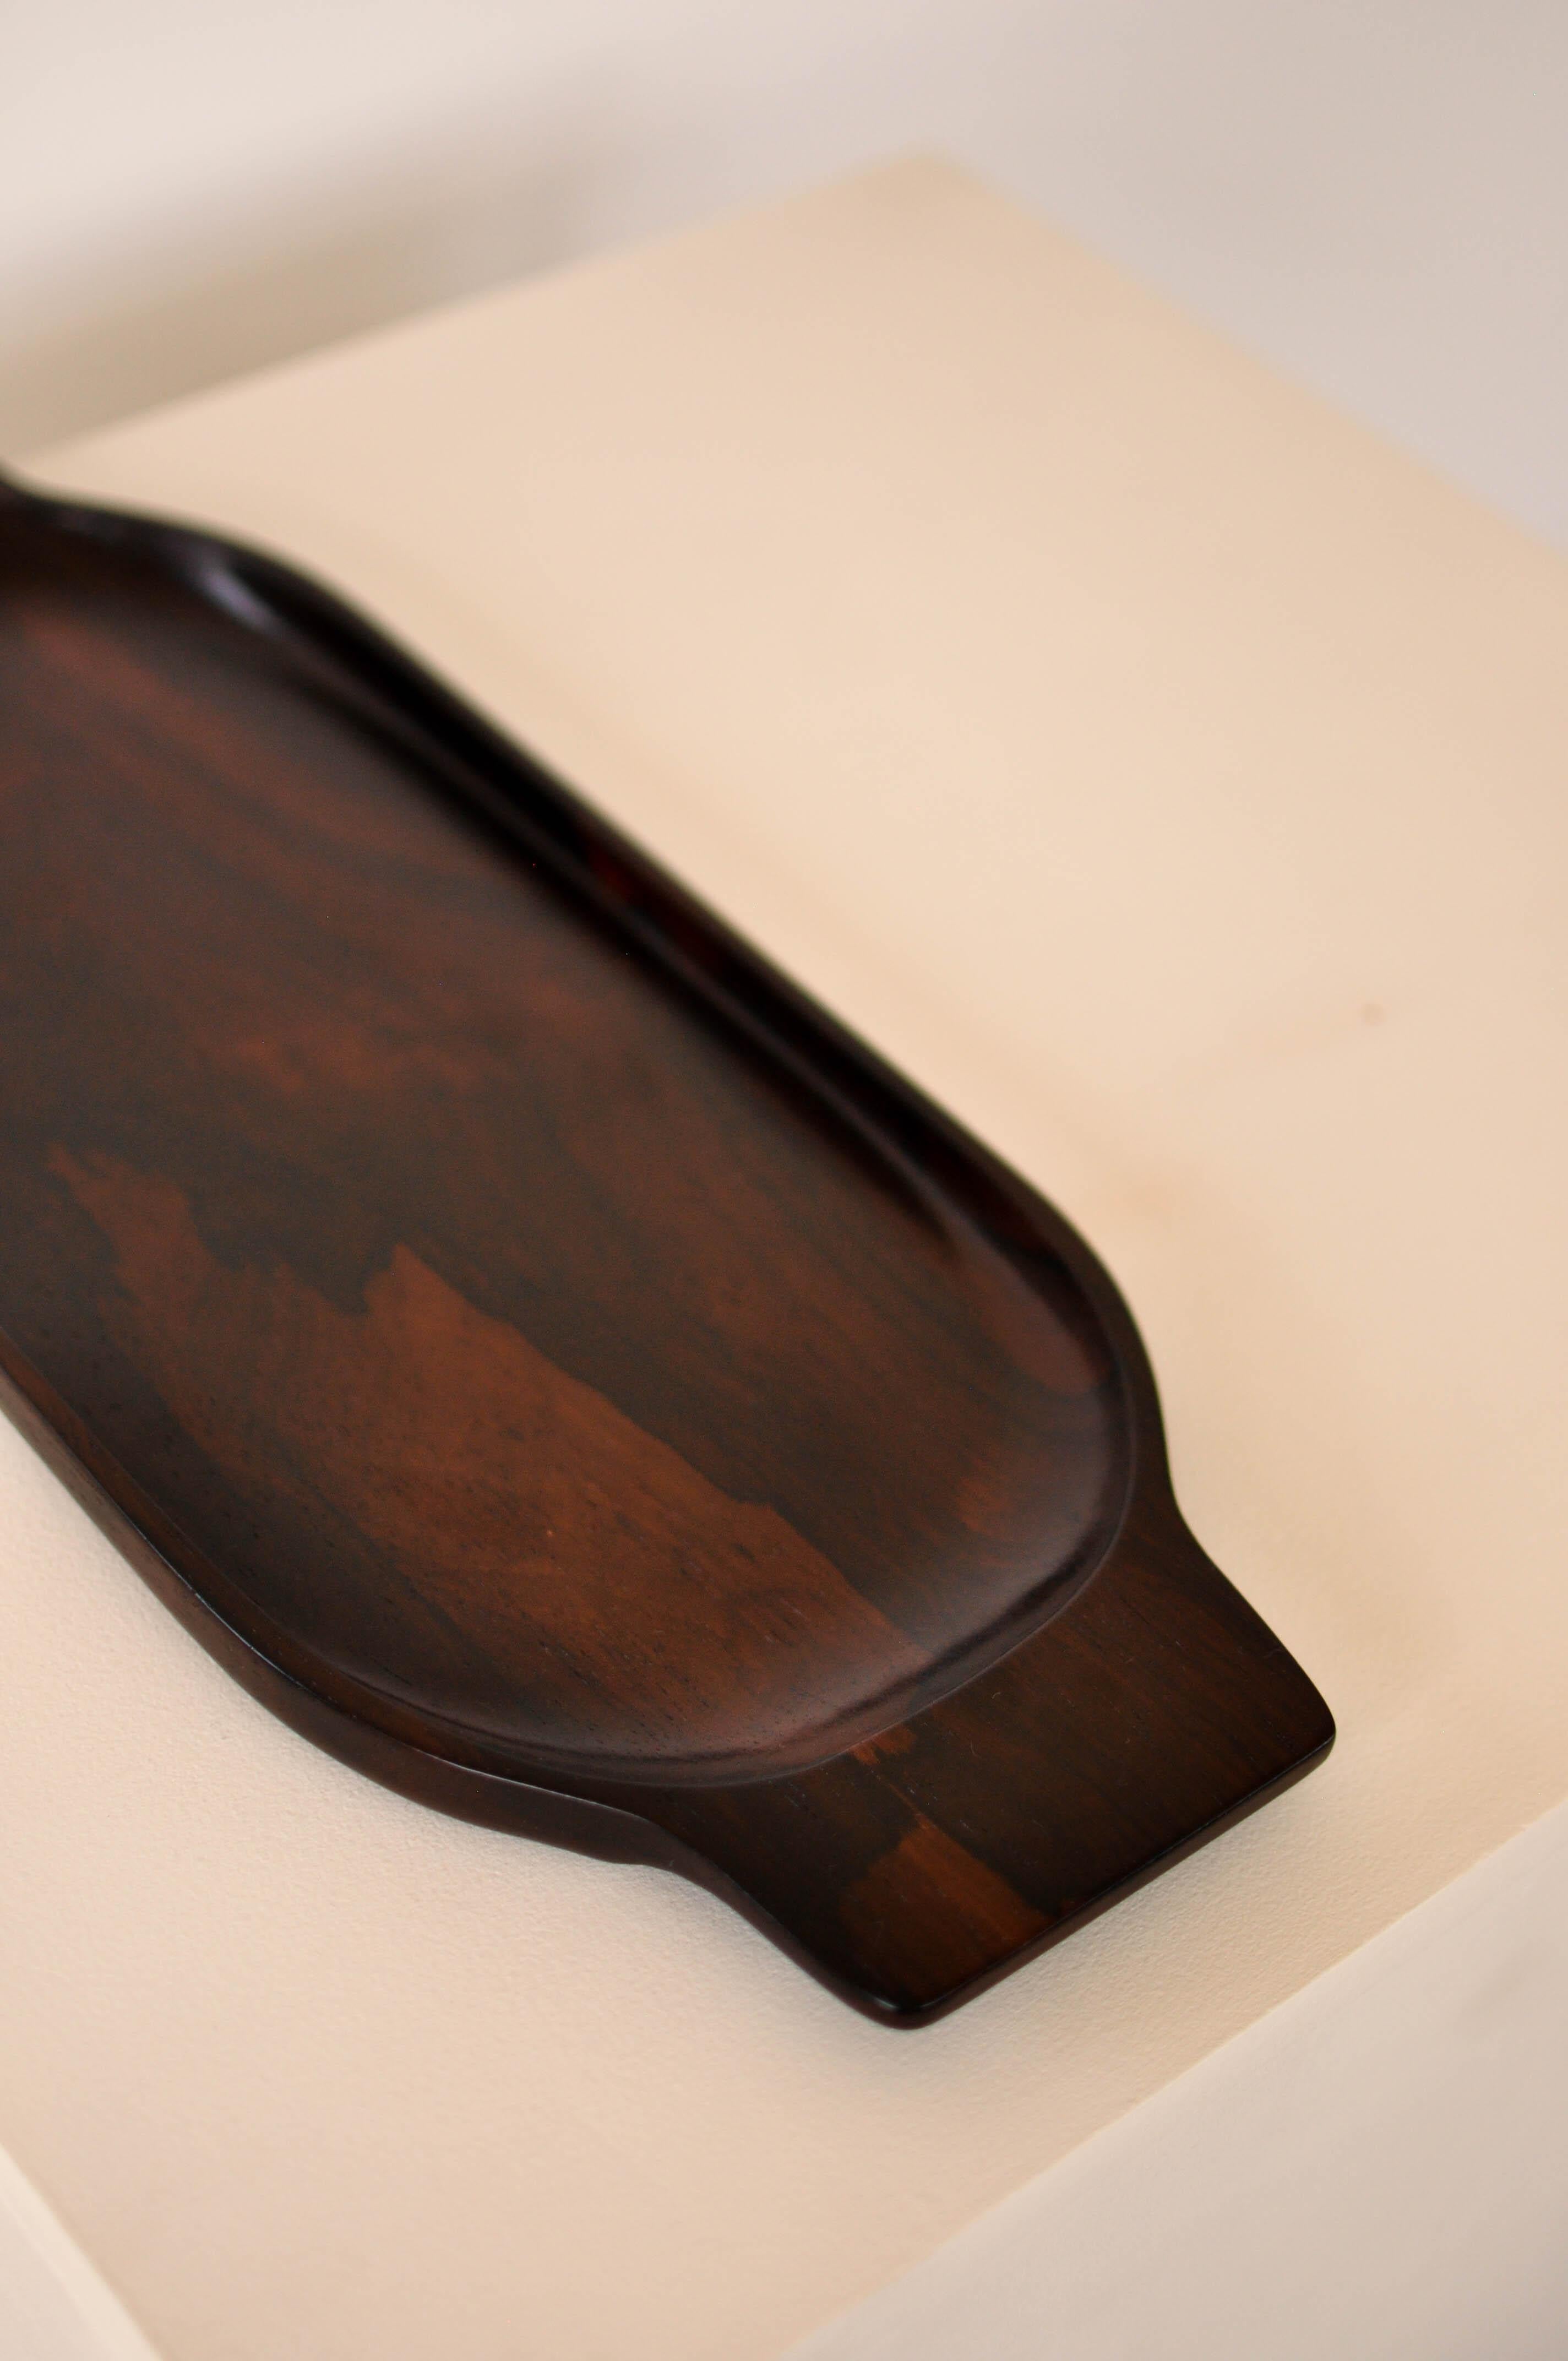 20th Century Brazilian Midcentury Serving Tray in Rosewood by Casa Finland, c. 1970 For Sale